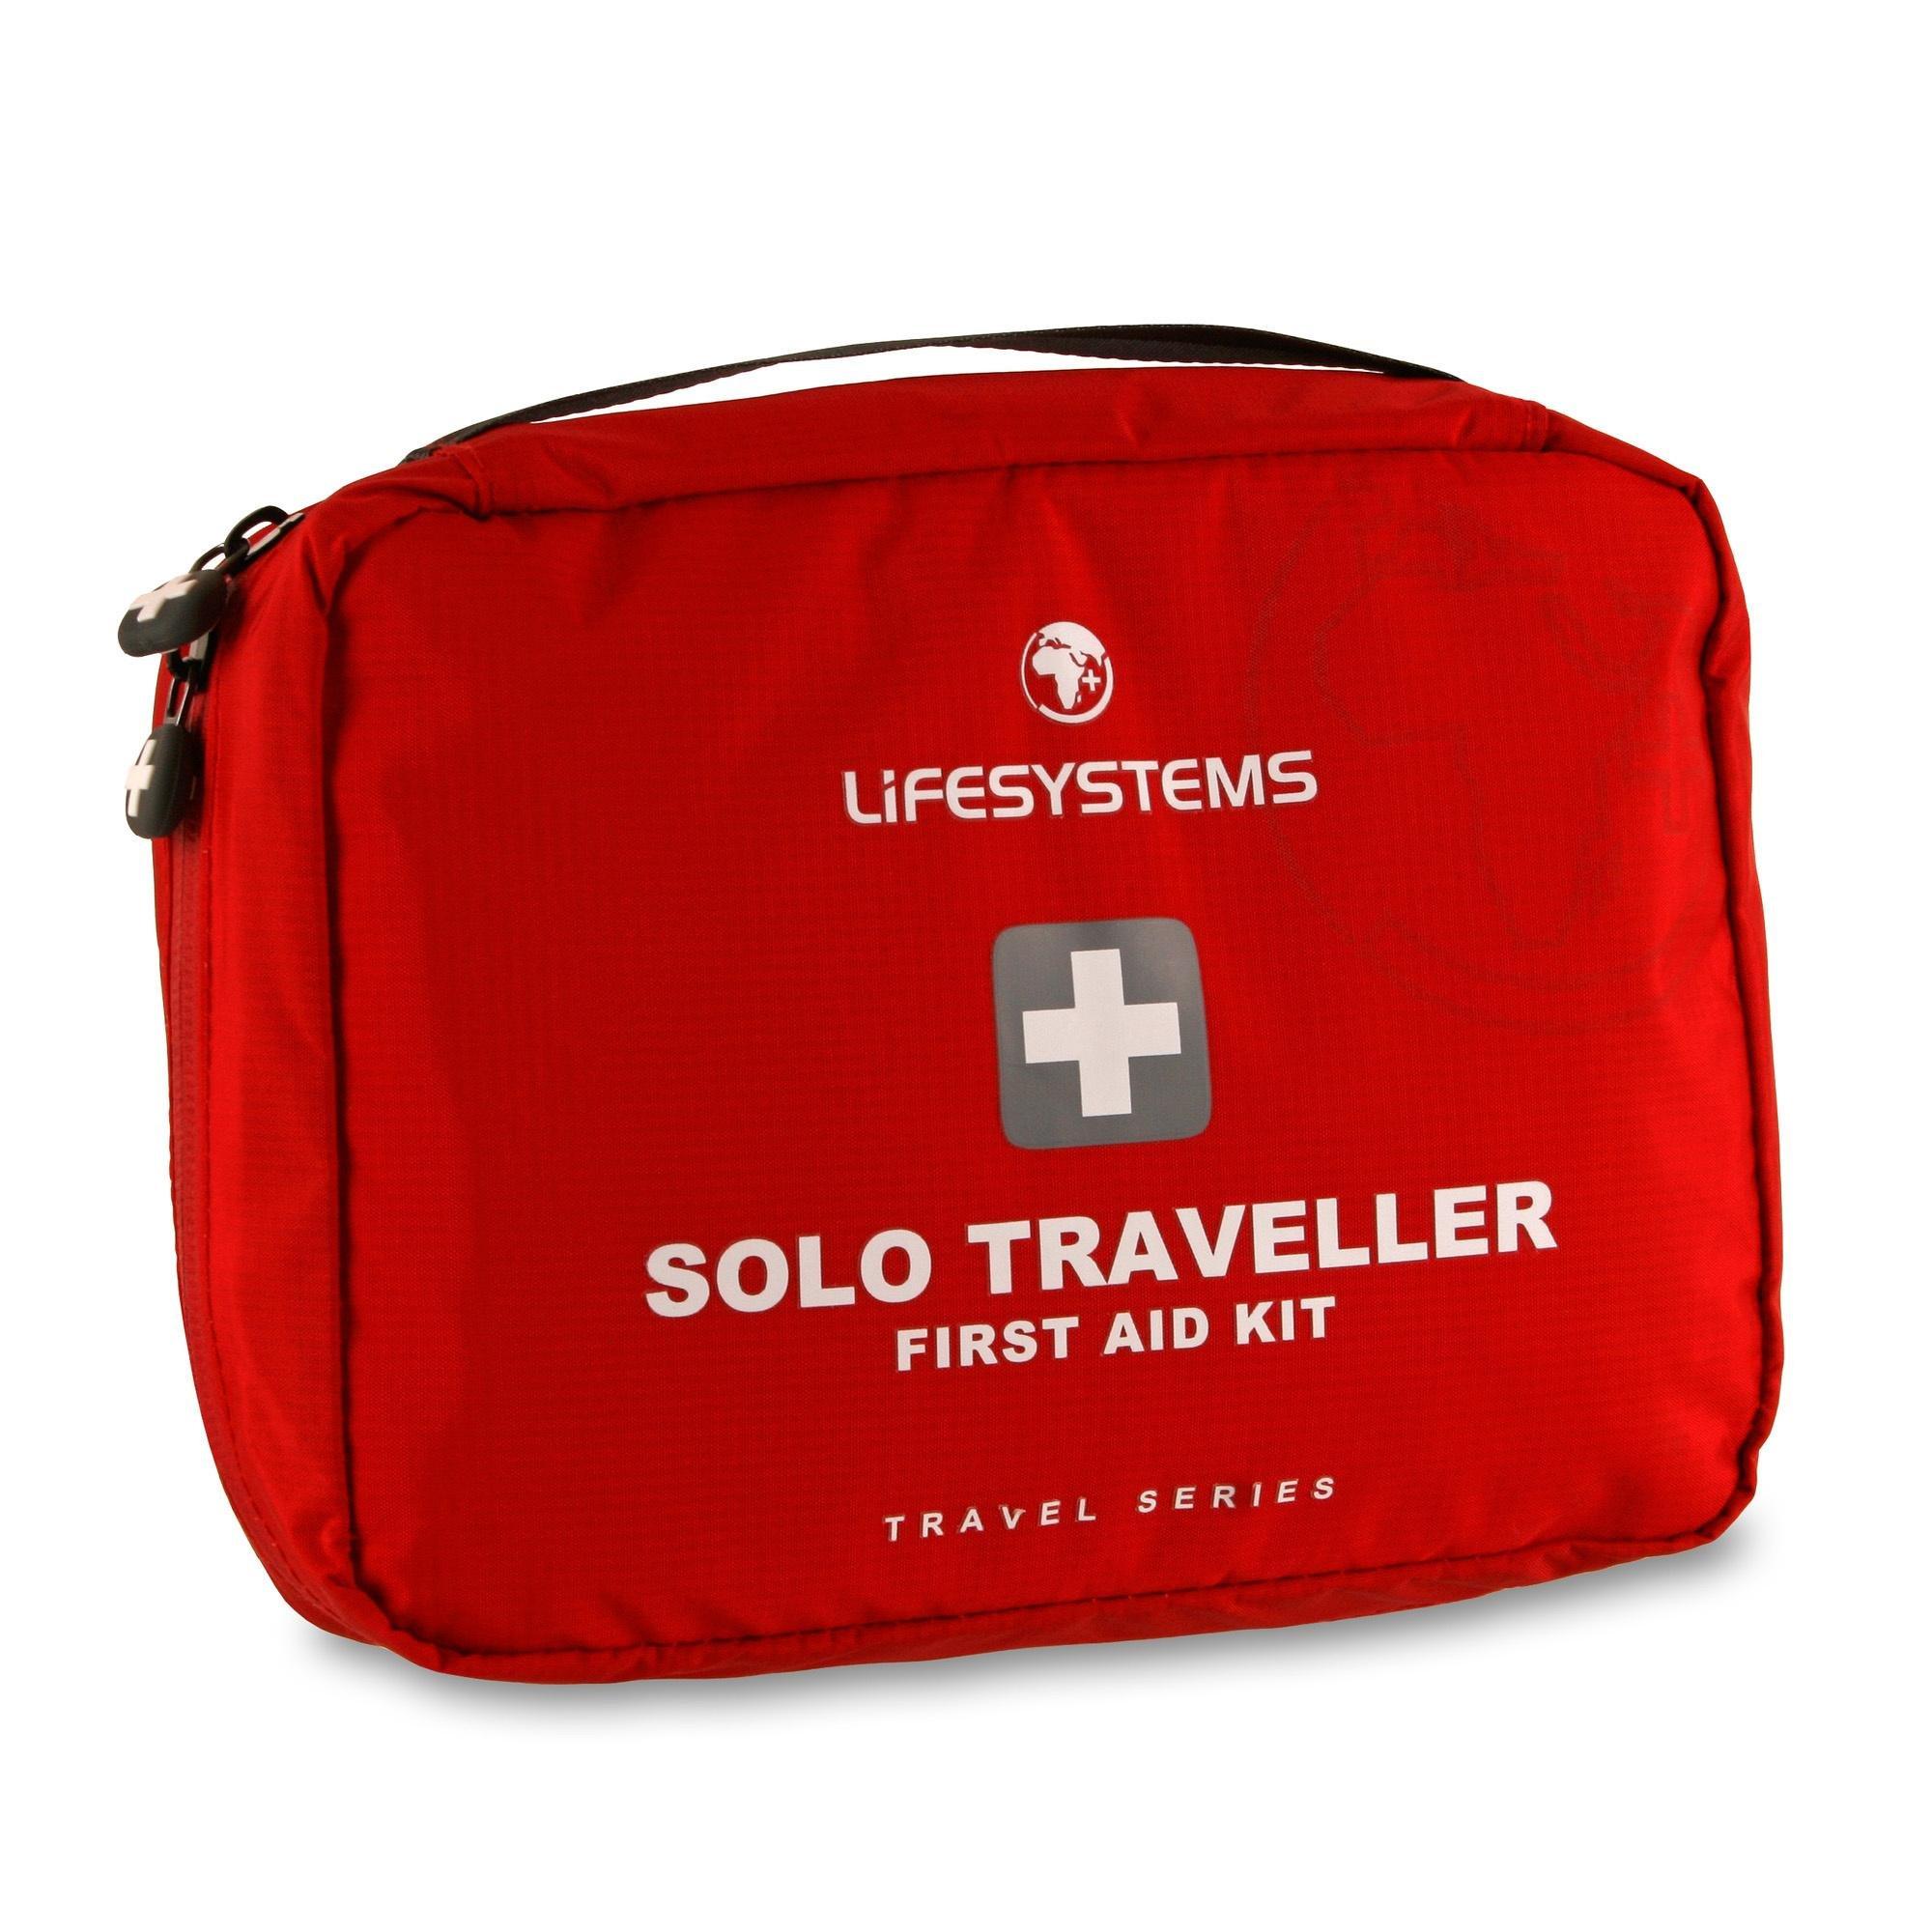  Lifesystems Solo Traveller First Aid Kit, Red